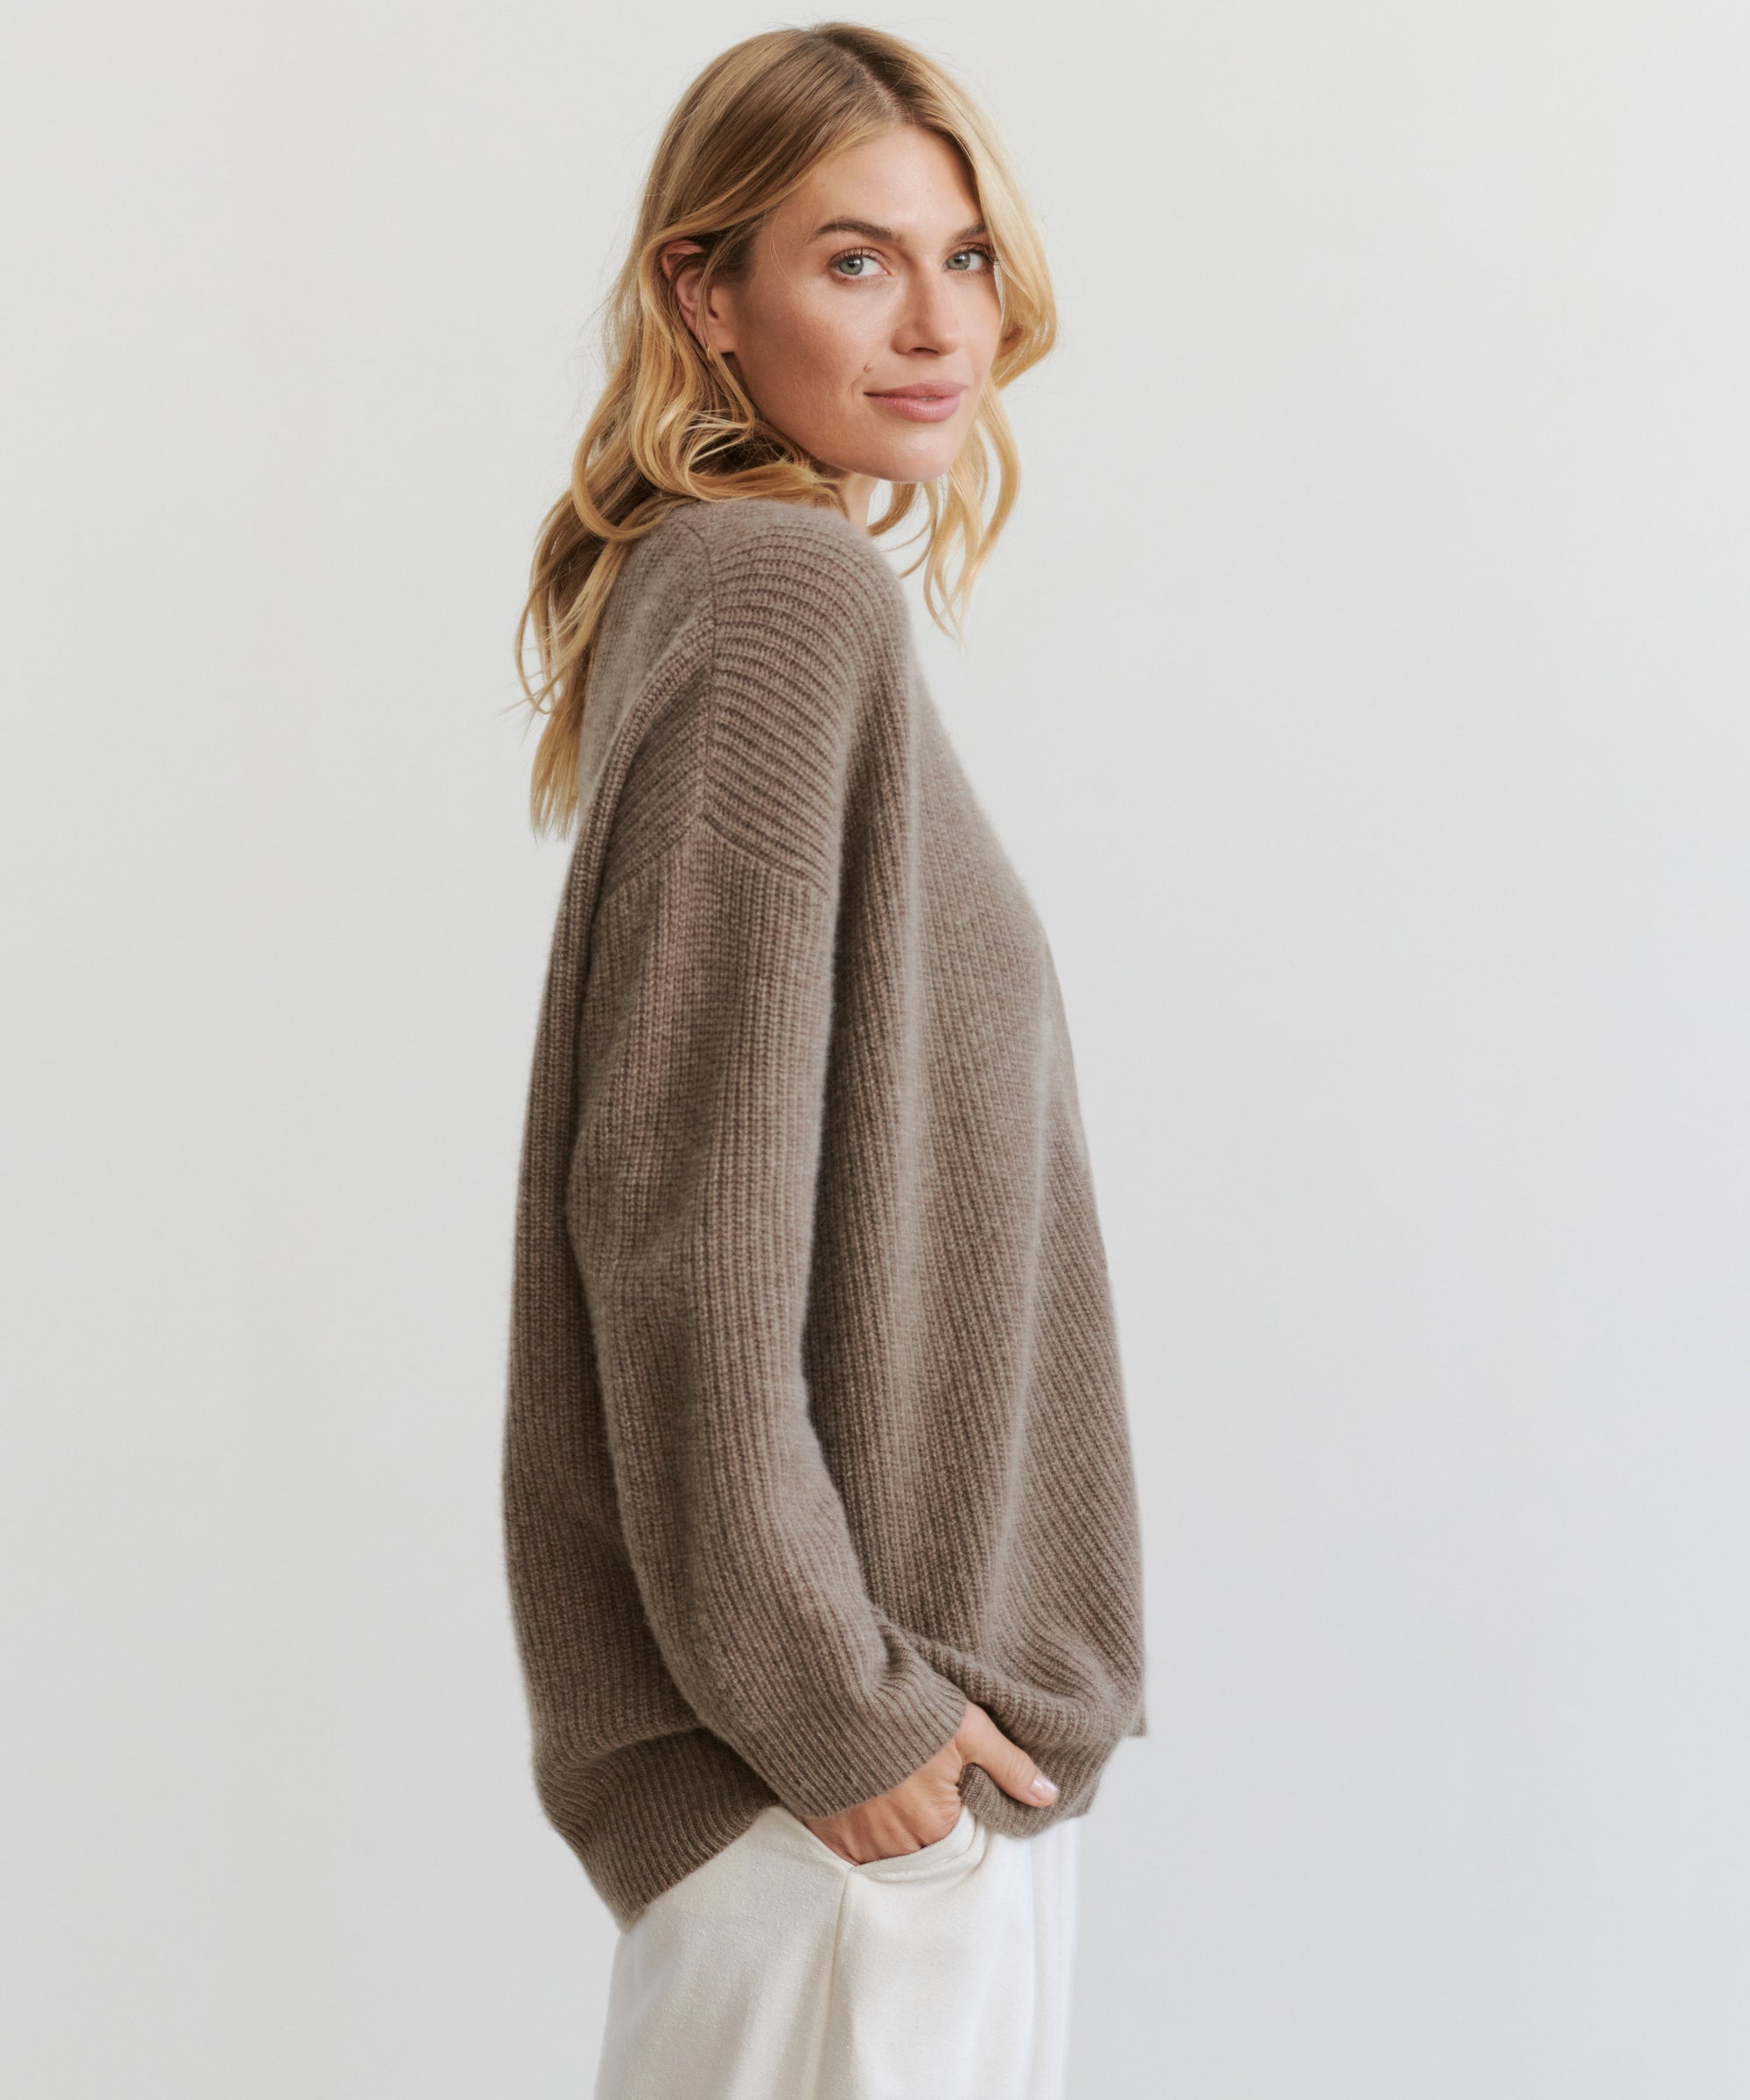 Cashmere Cocoon Cardigan,Fall Women V Neck Thin & Warm Sweaters,Oversized  Open Front Lightweight Loose Knit Outwear (Color : Gray, Size : Medium)